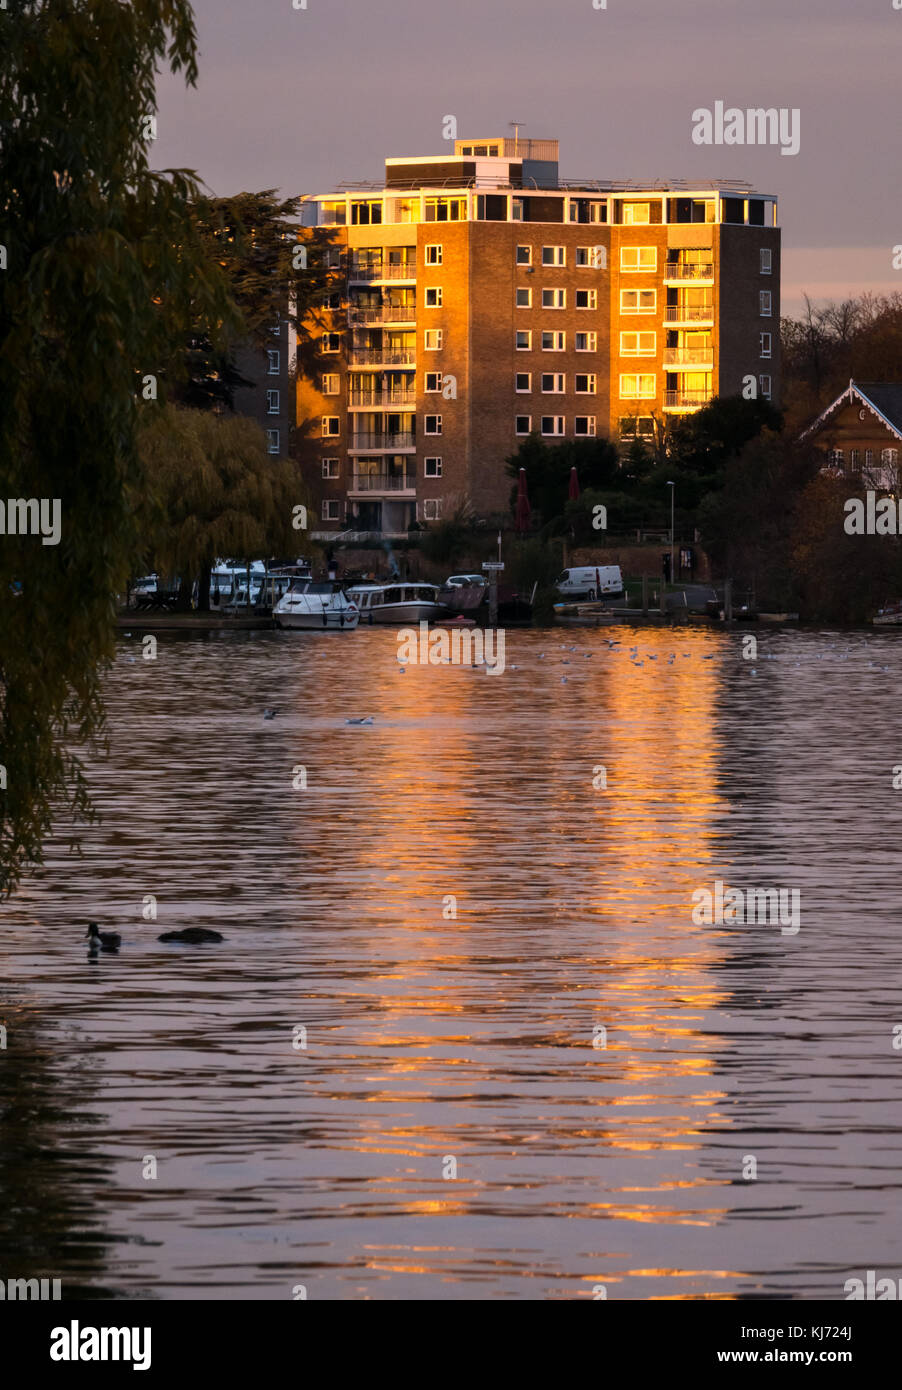 Autumn sunset colours on Thames River, Hampton Wick looking East down river to a high modern apartment block reflected in the water, London, UK Stock Photo